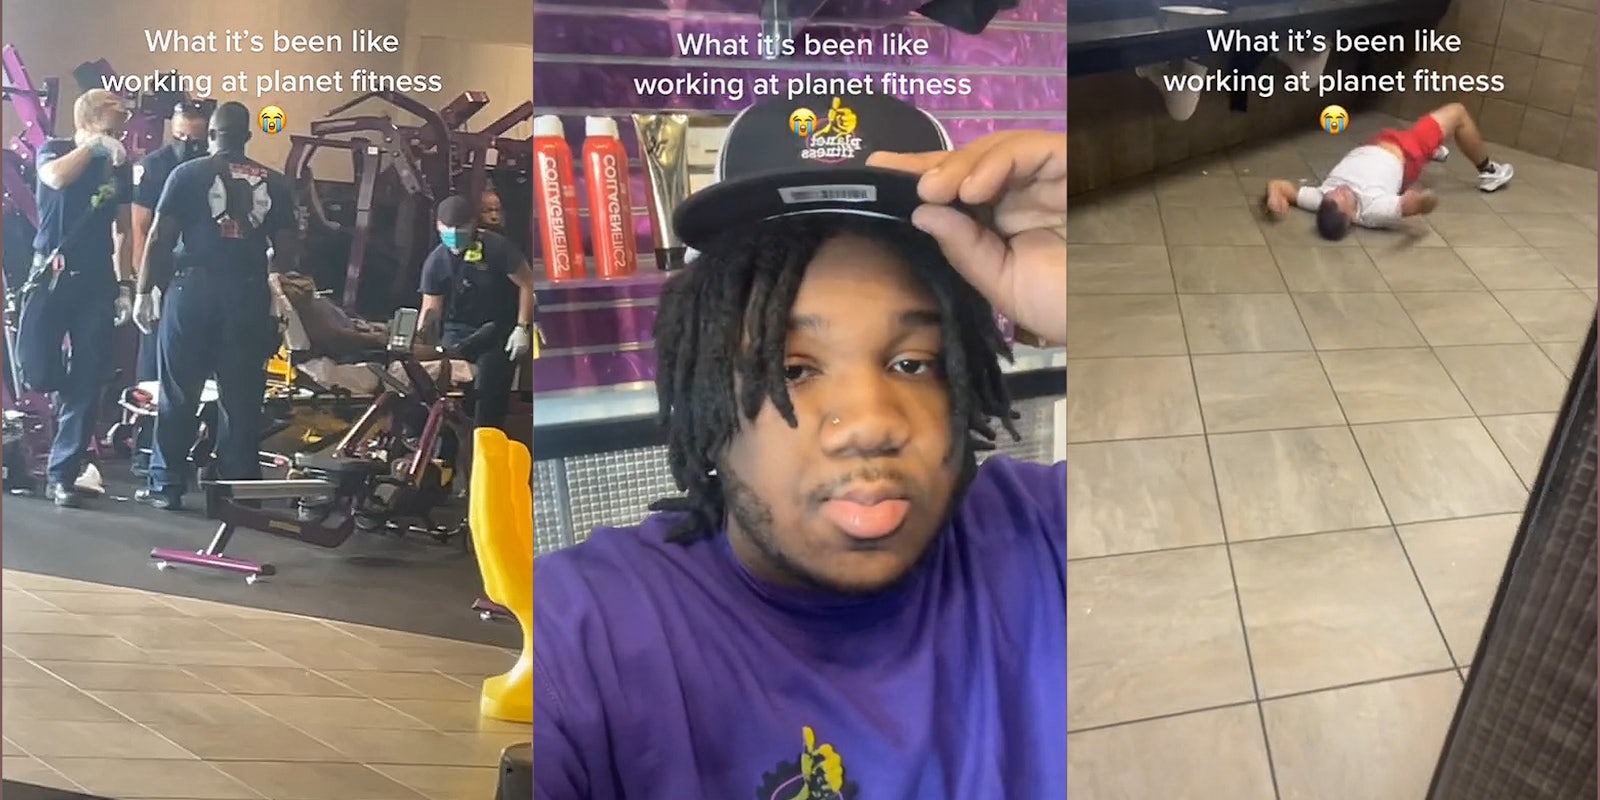 Worker Shares What It's Like To Work at Planet Fitness